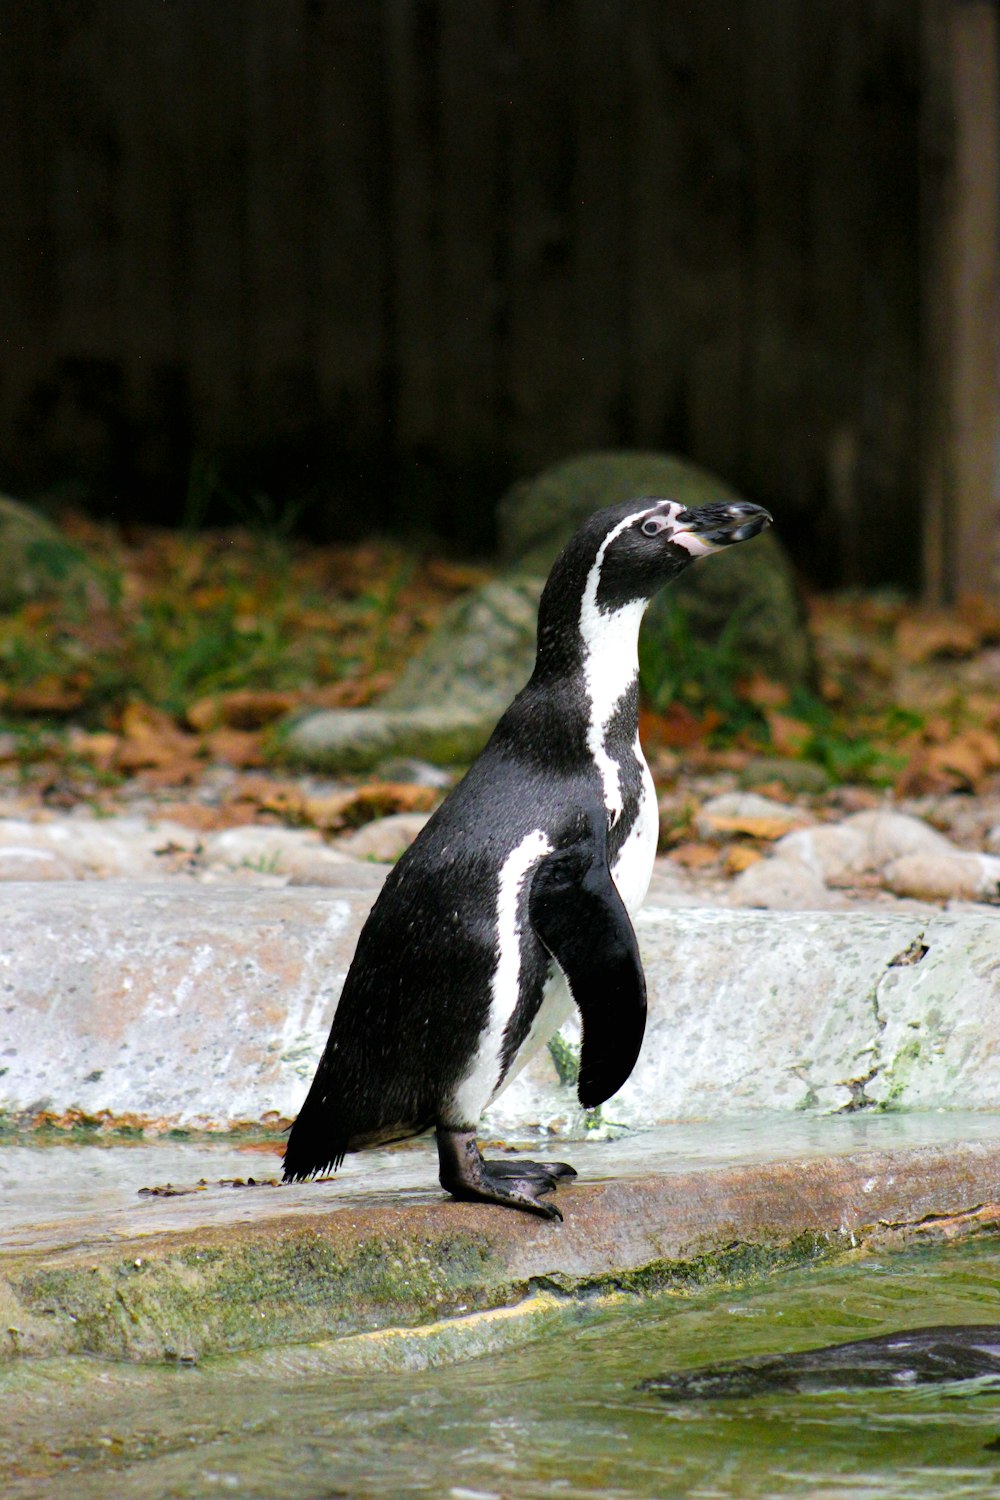 a penguin standing on a rock near a body of water